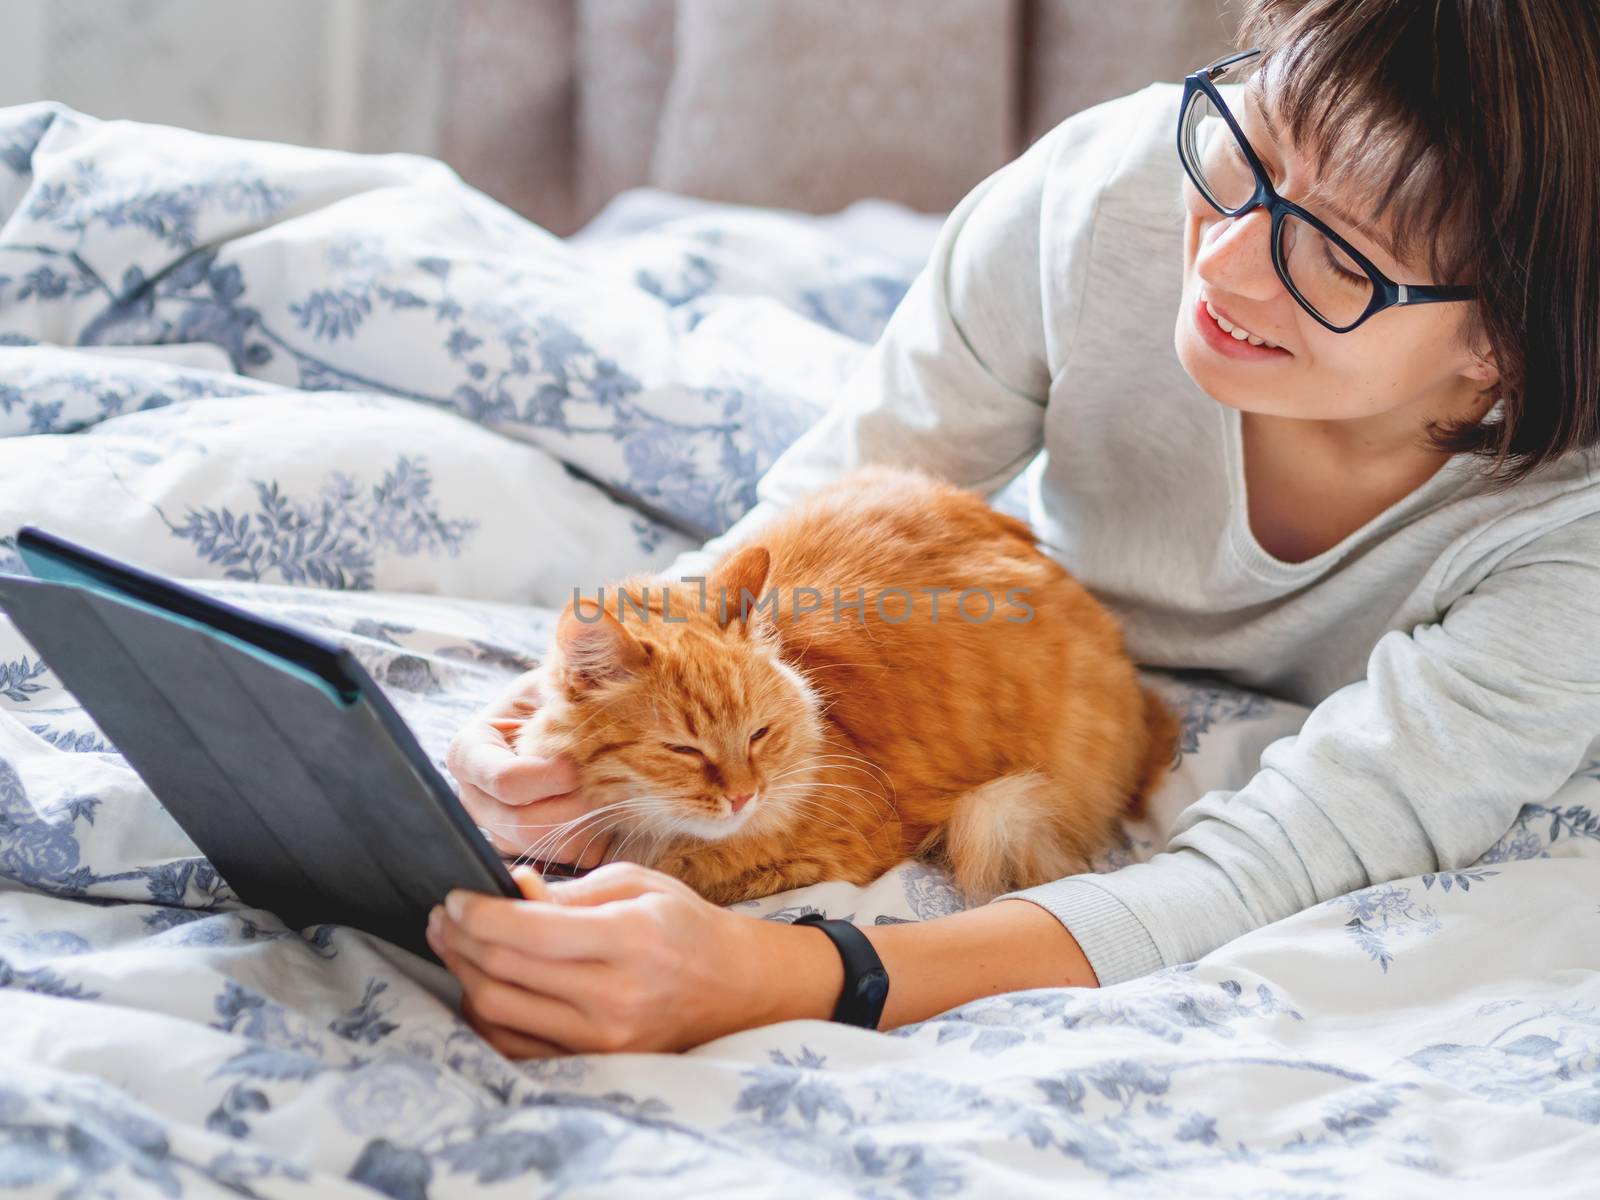 Cute ginger cat and woman in glasses are lying in bed. Woman is holding tablet and stroking her fluffy pet. Morning bedtime.